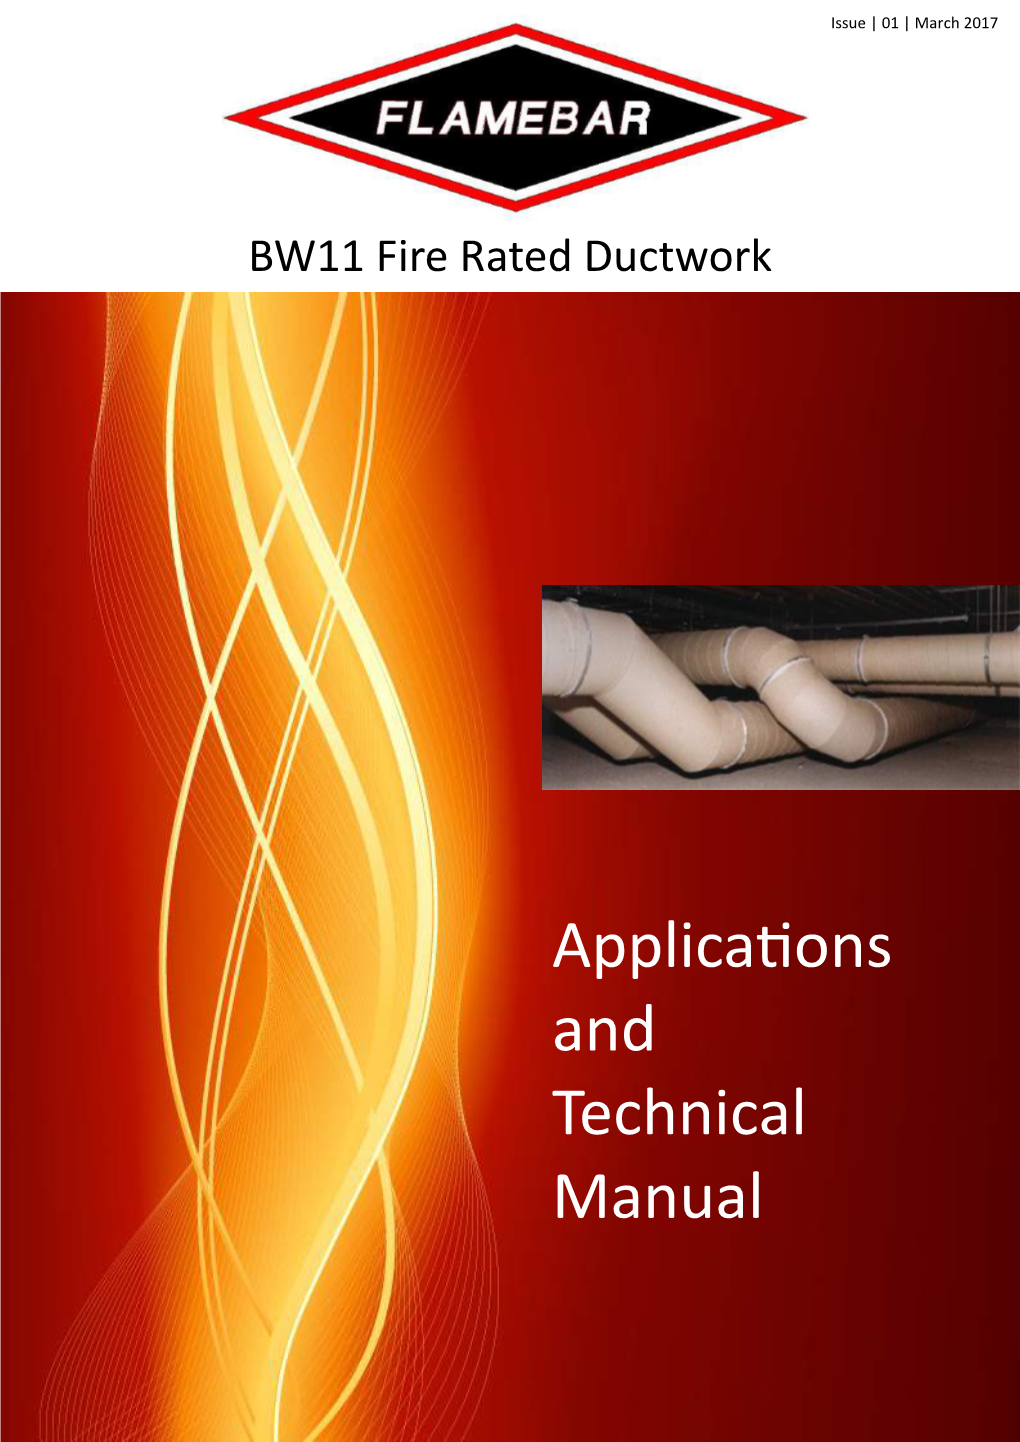 Applications and Technical Manual Introduction